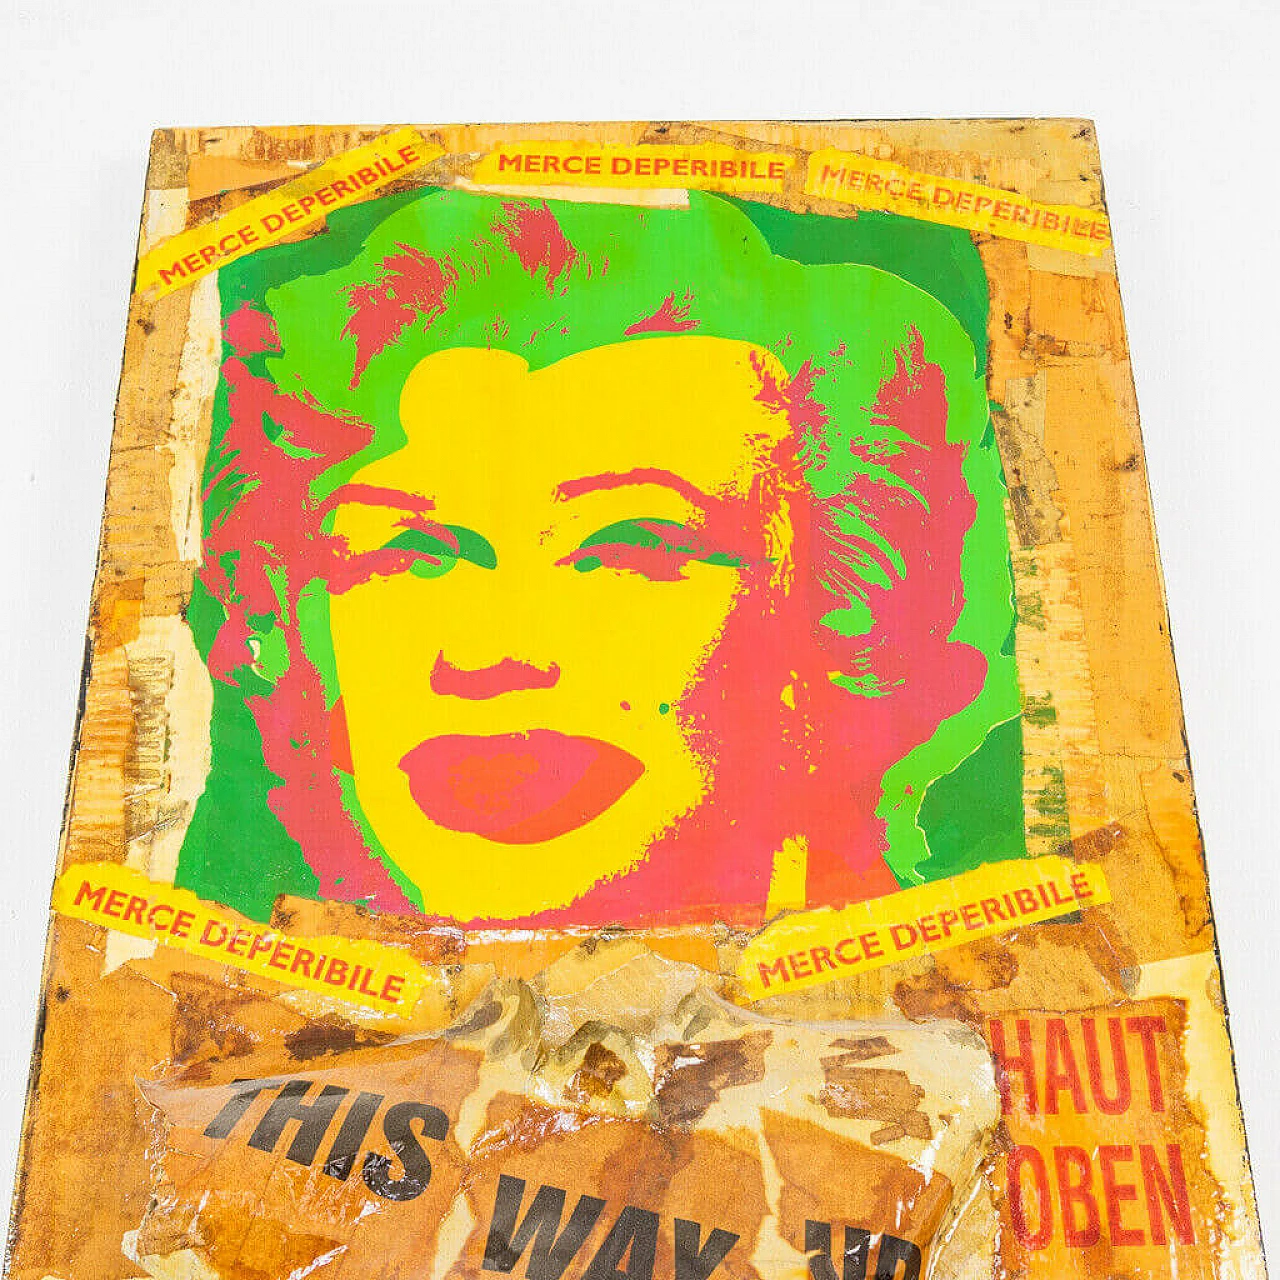 Mixed media painting on wood in pop-art style by Giuseppe De Simone, 2009 1198915